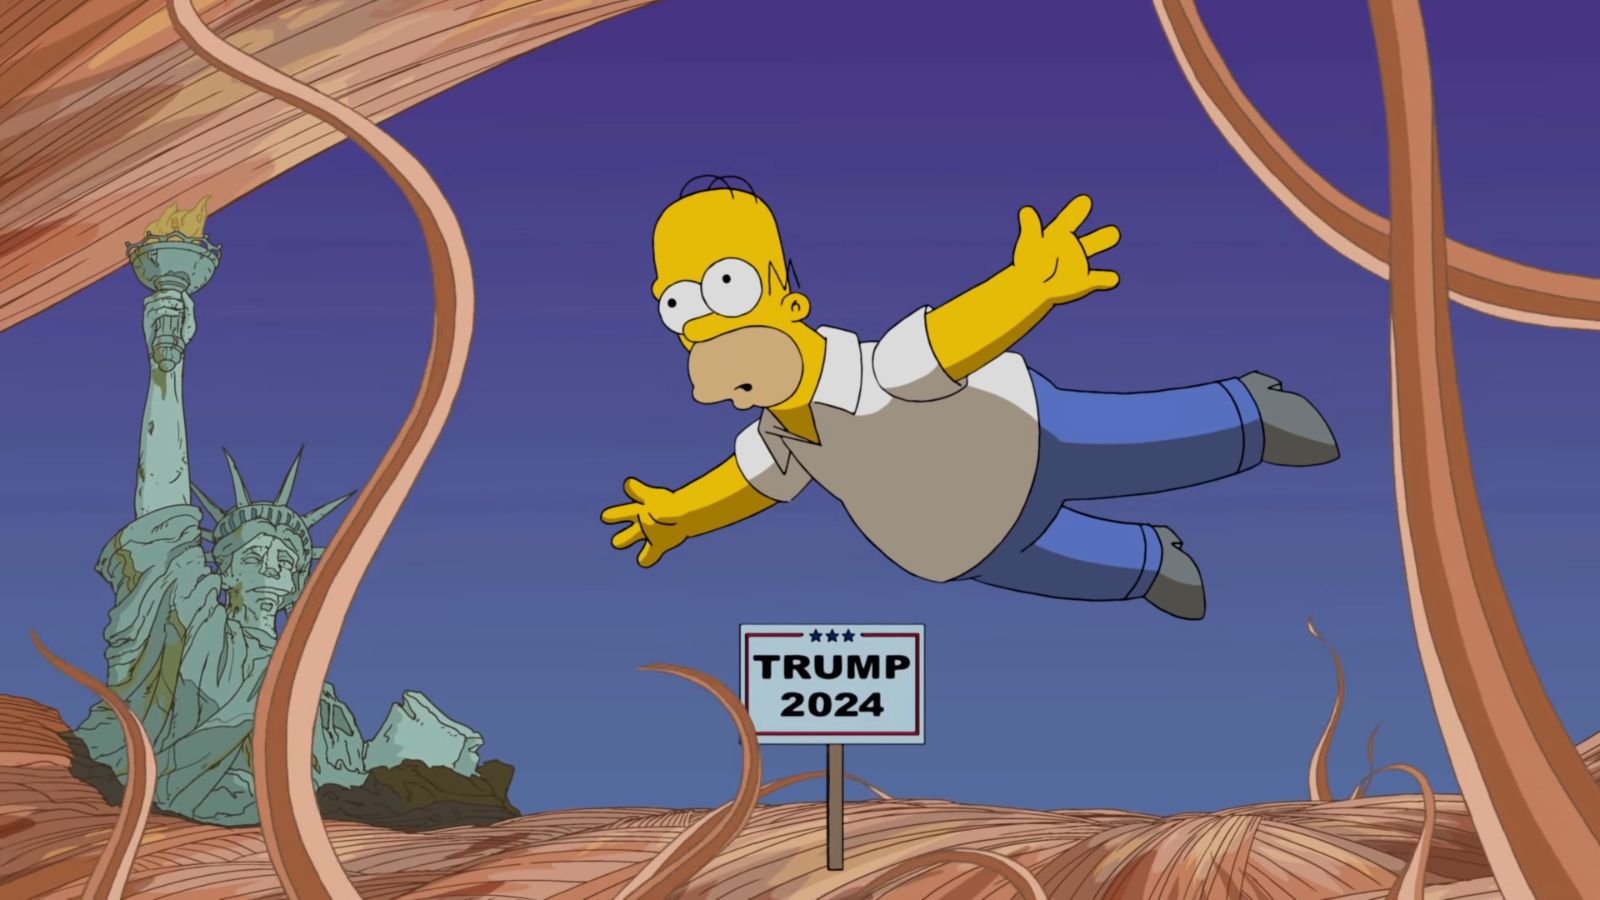 Of course 'The Simpsons' predicted Donald Trump running for presidency in 2024